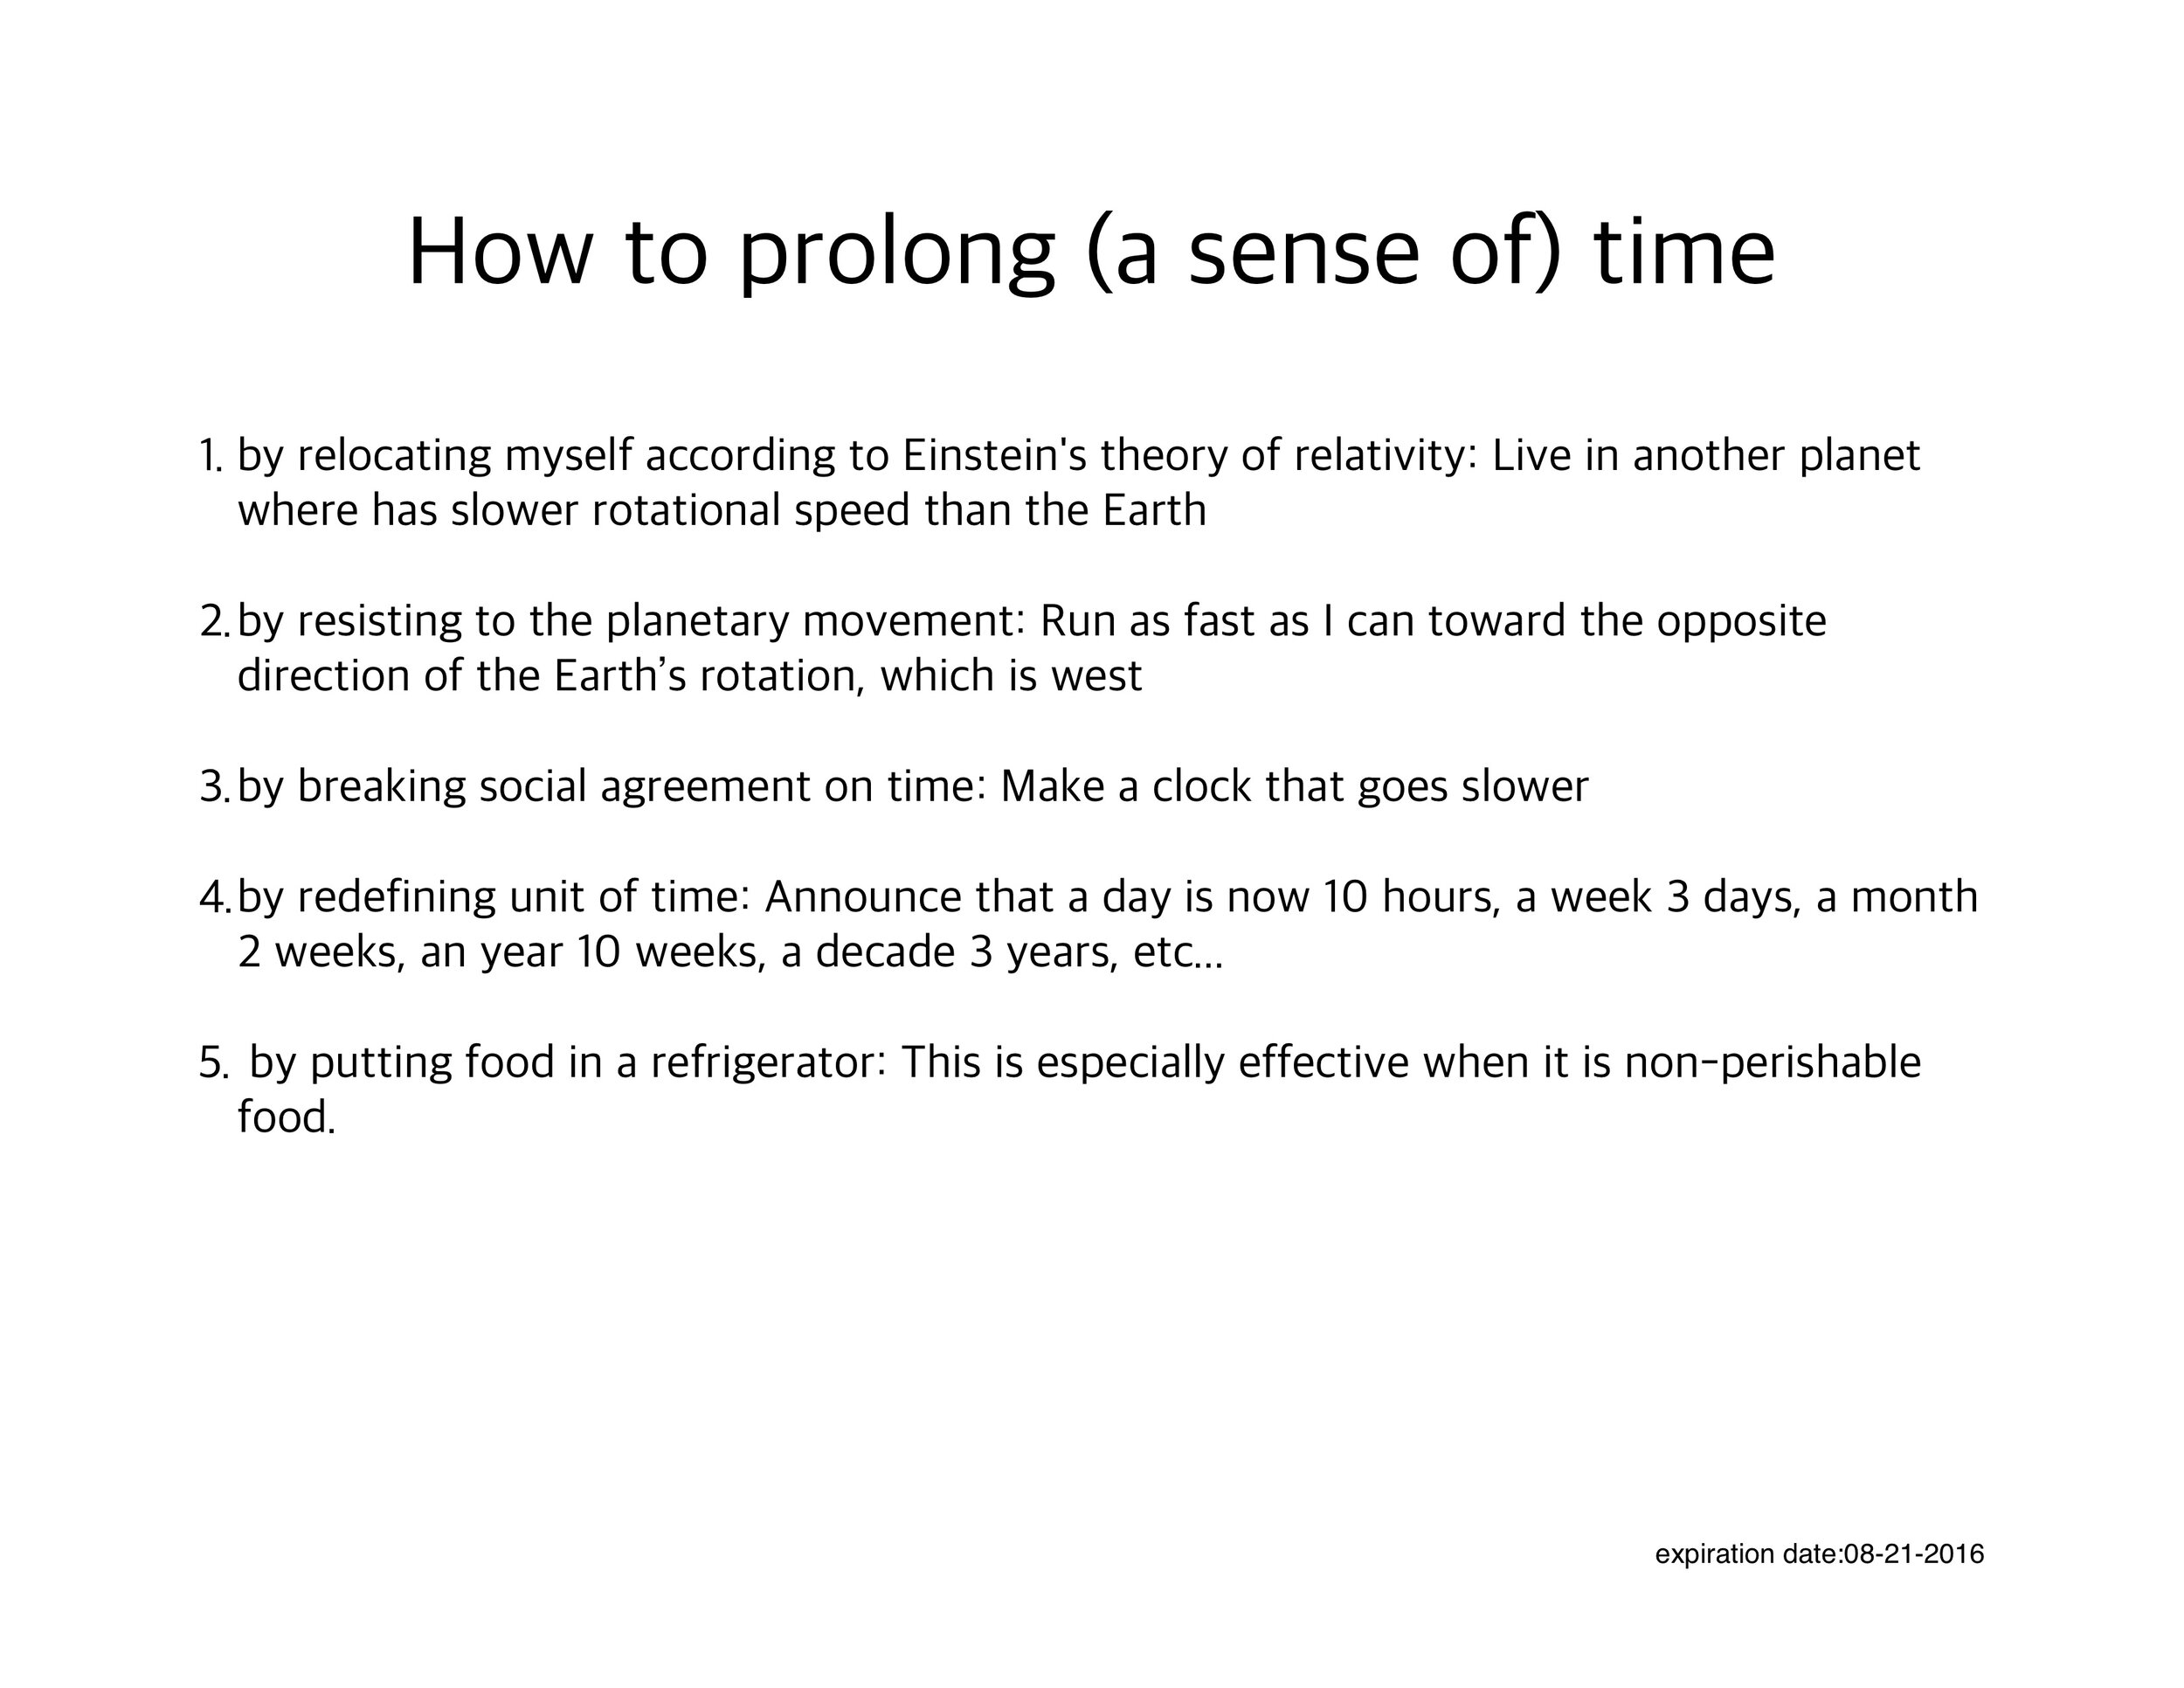 how to prolong a sense of time.jpg